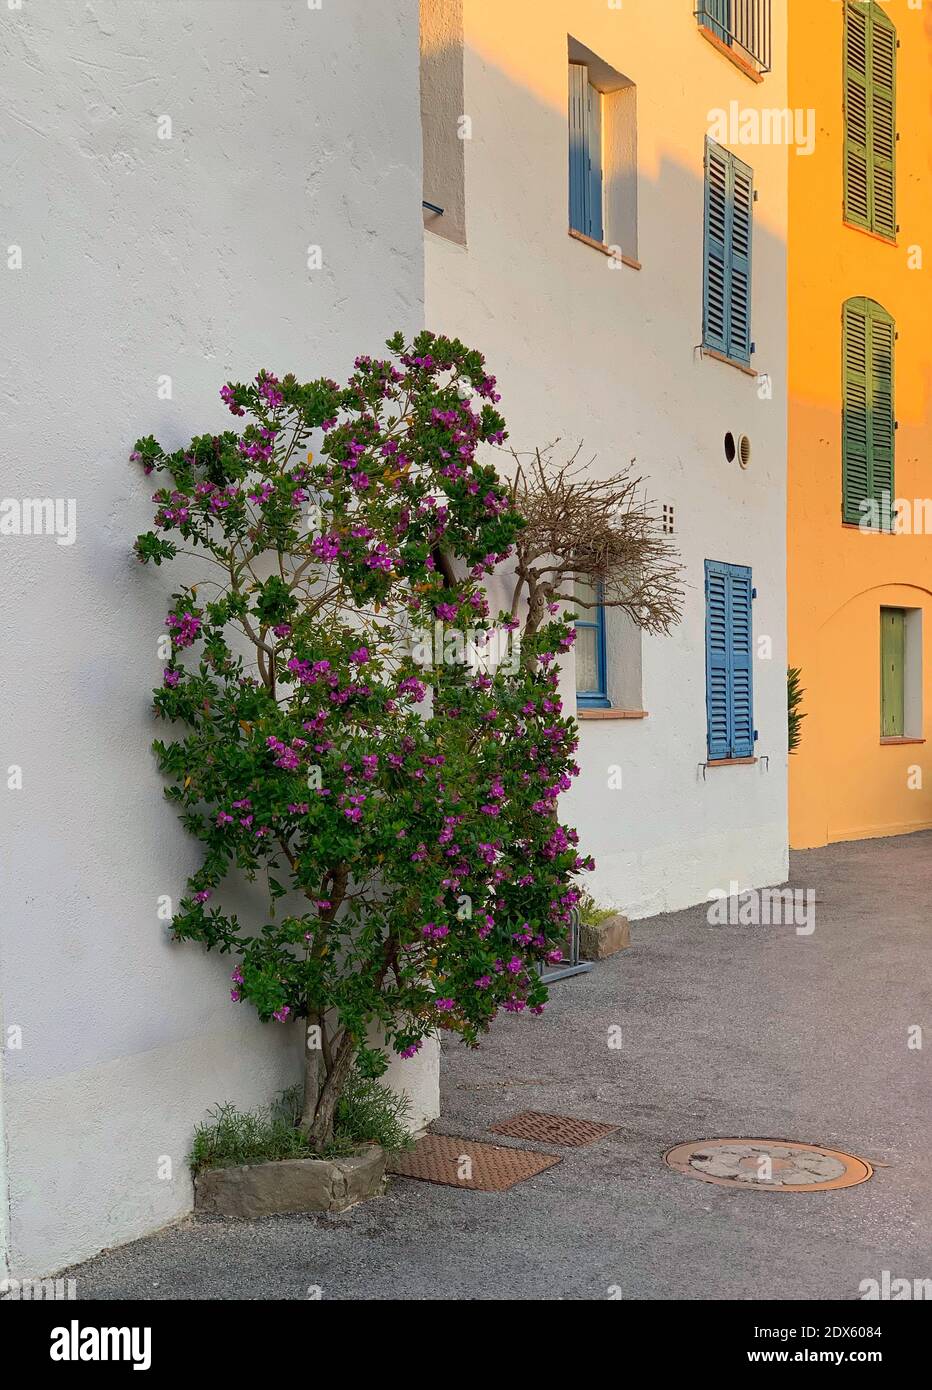 Flower Plant On Street By Building Stock Photo